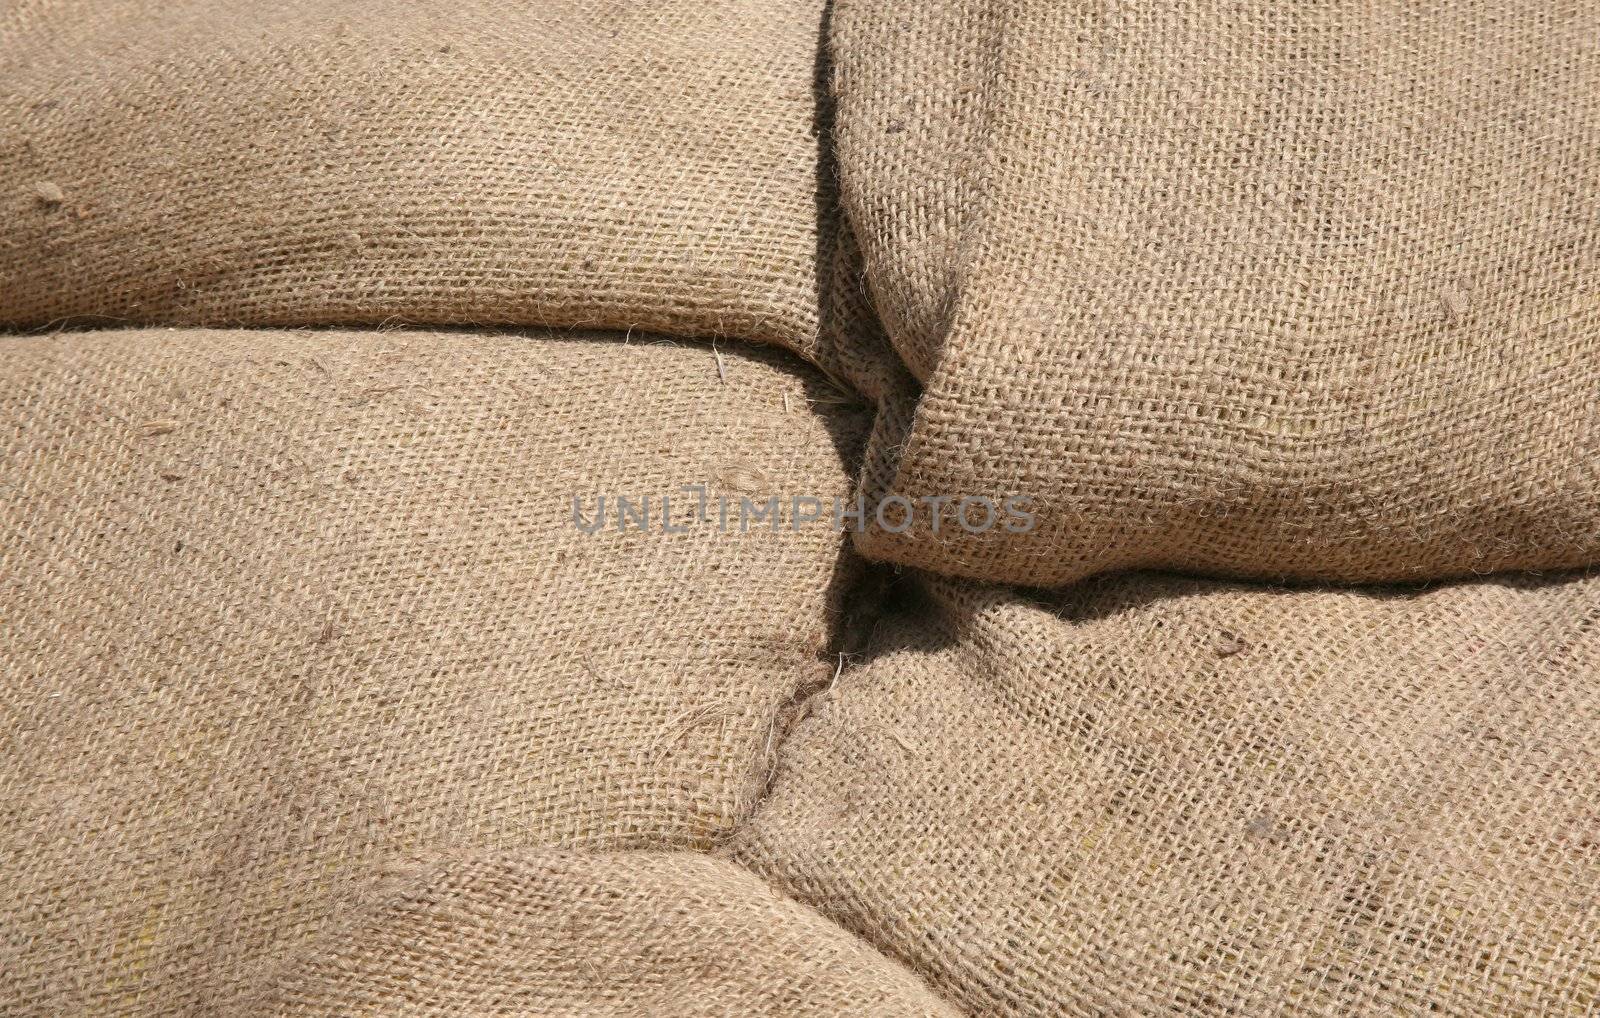 Burlap bag background by scrappinstacy